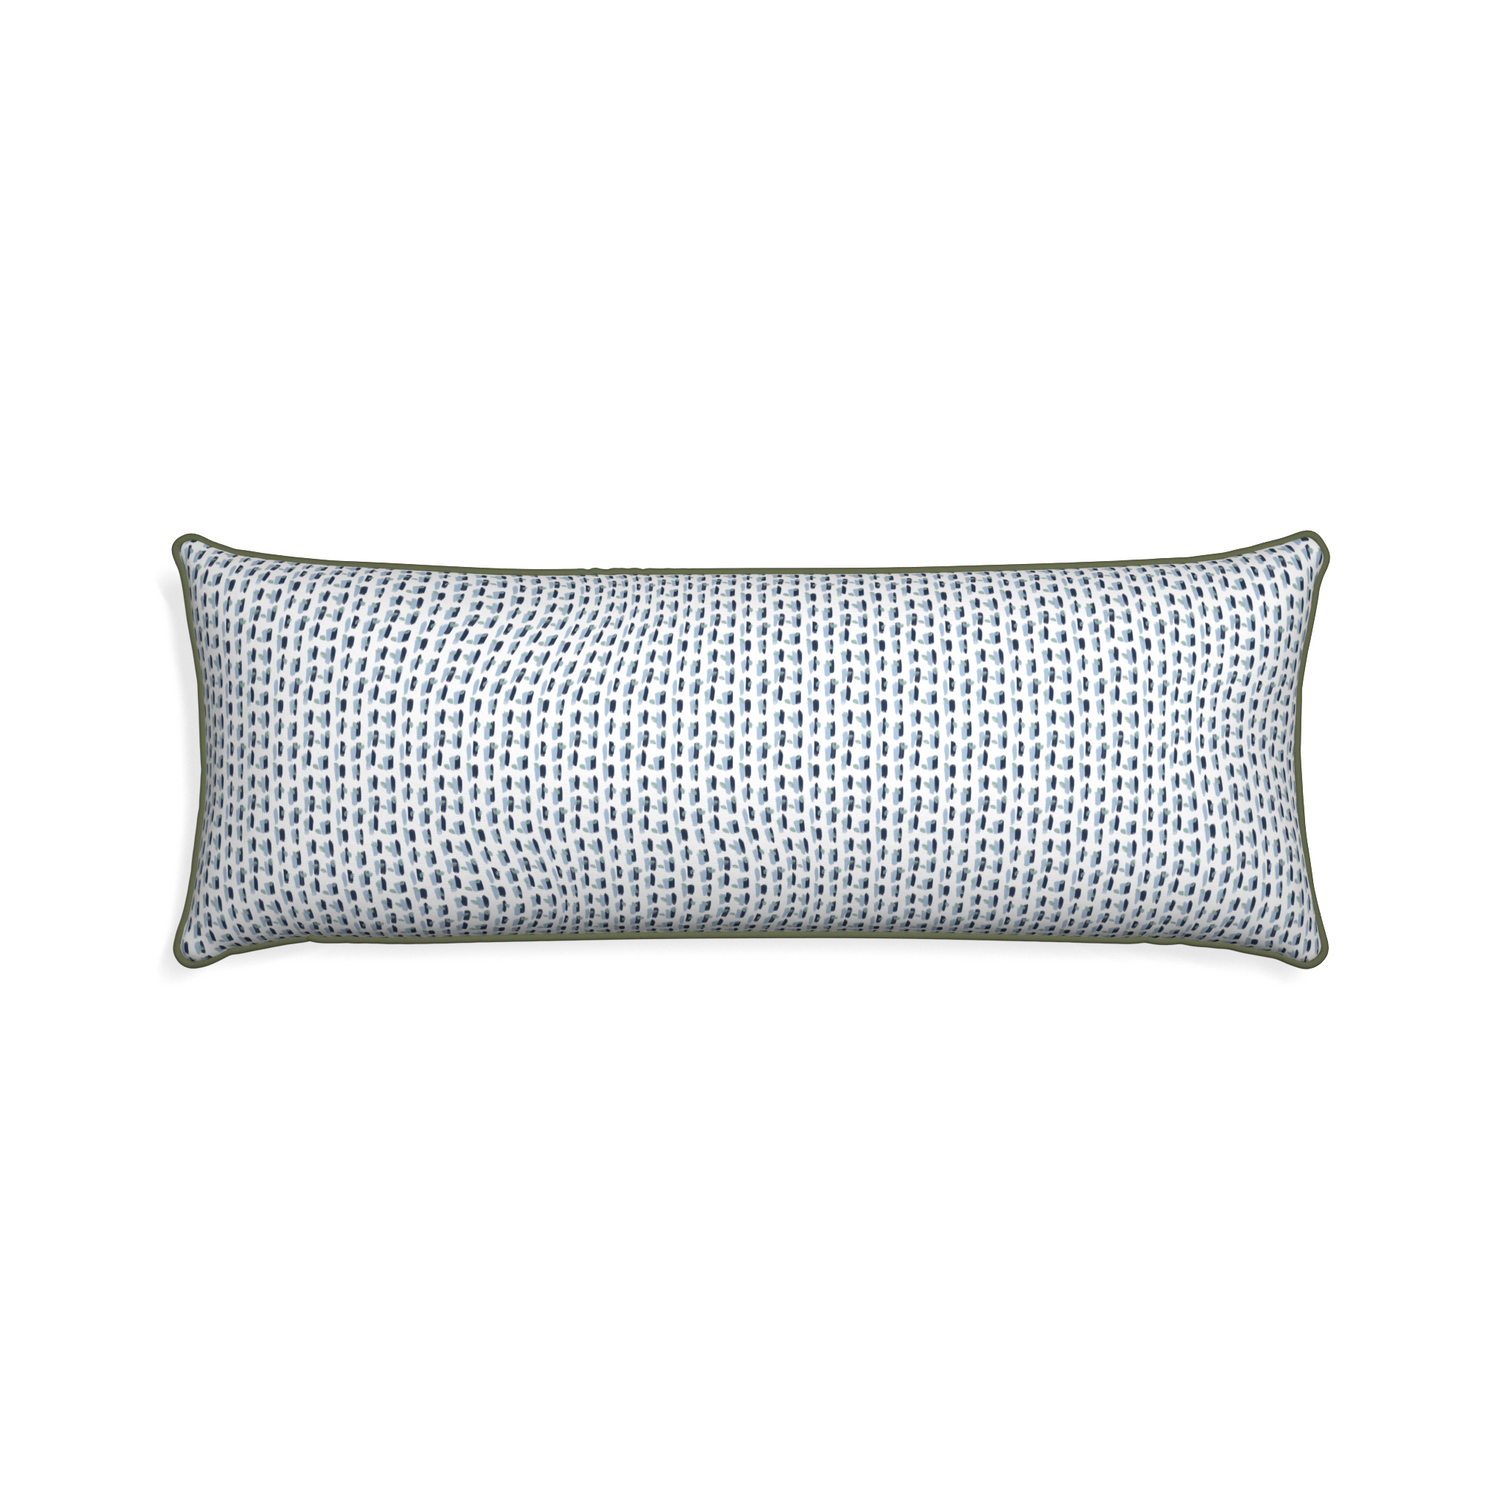 Xl-lumbar poppy blue custom pillow with f piping on white background